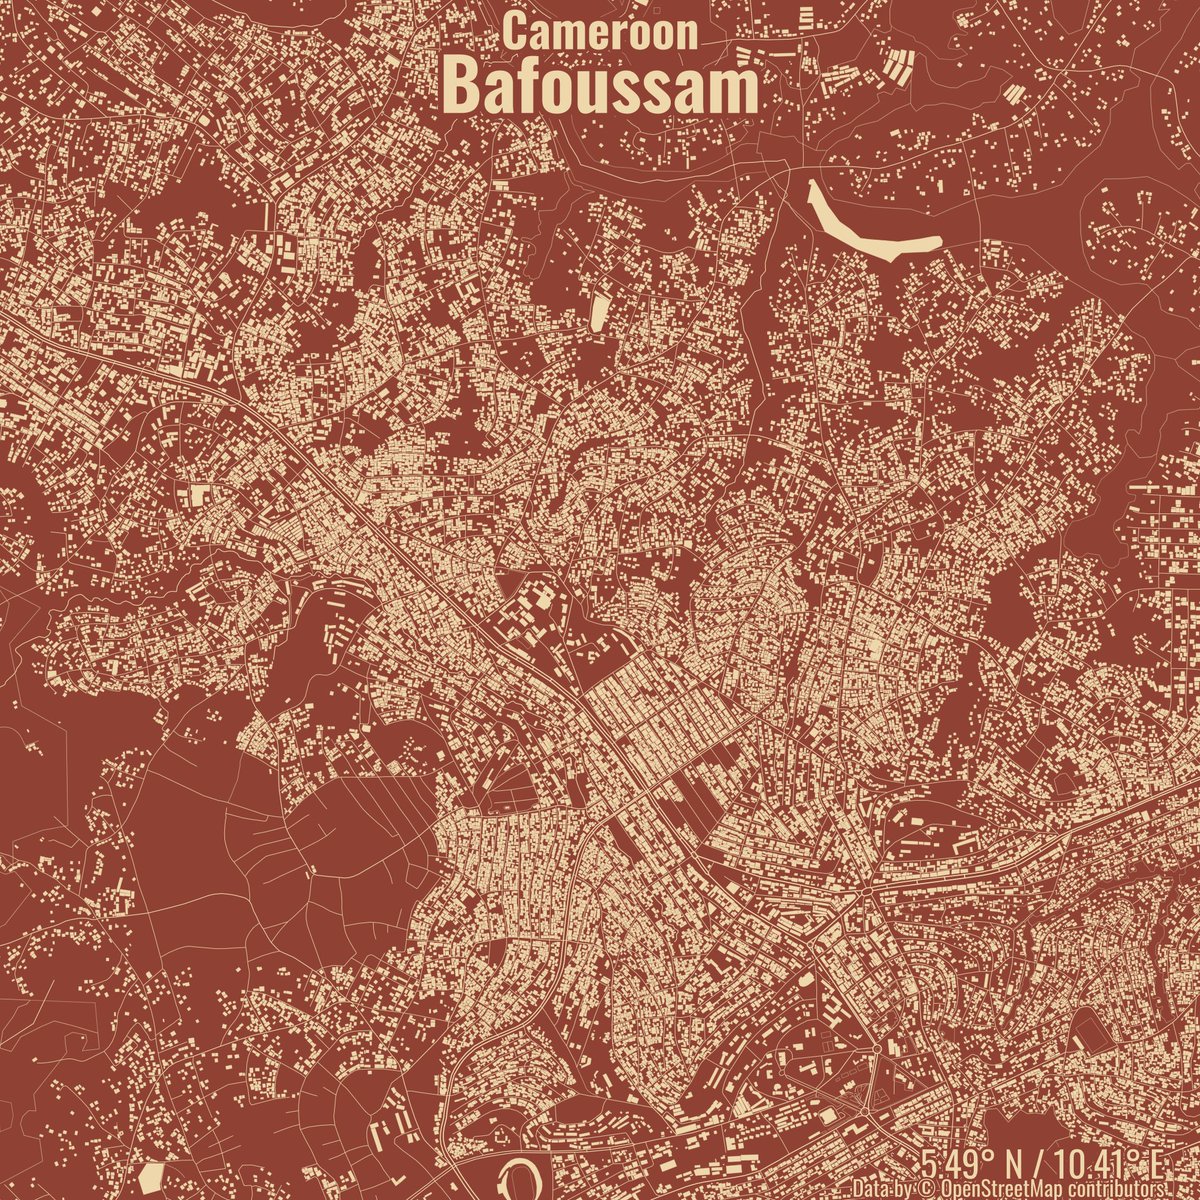 Image of Bafoussam, Cameroon created in #rstats using data from #OpenStreetMap.